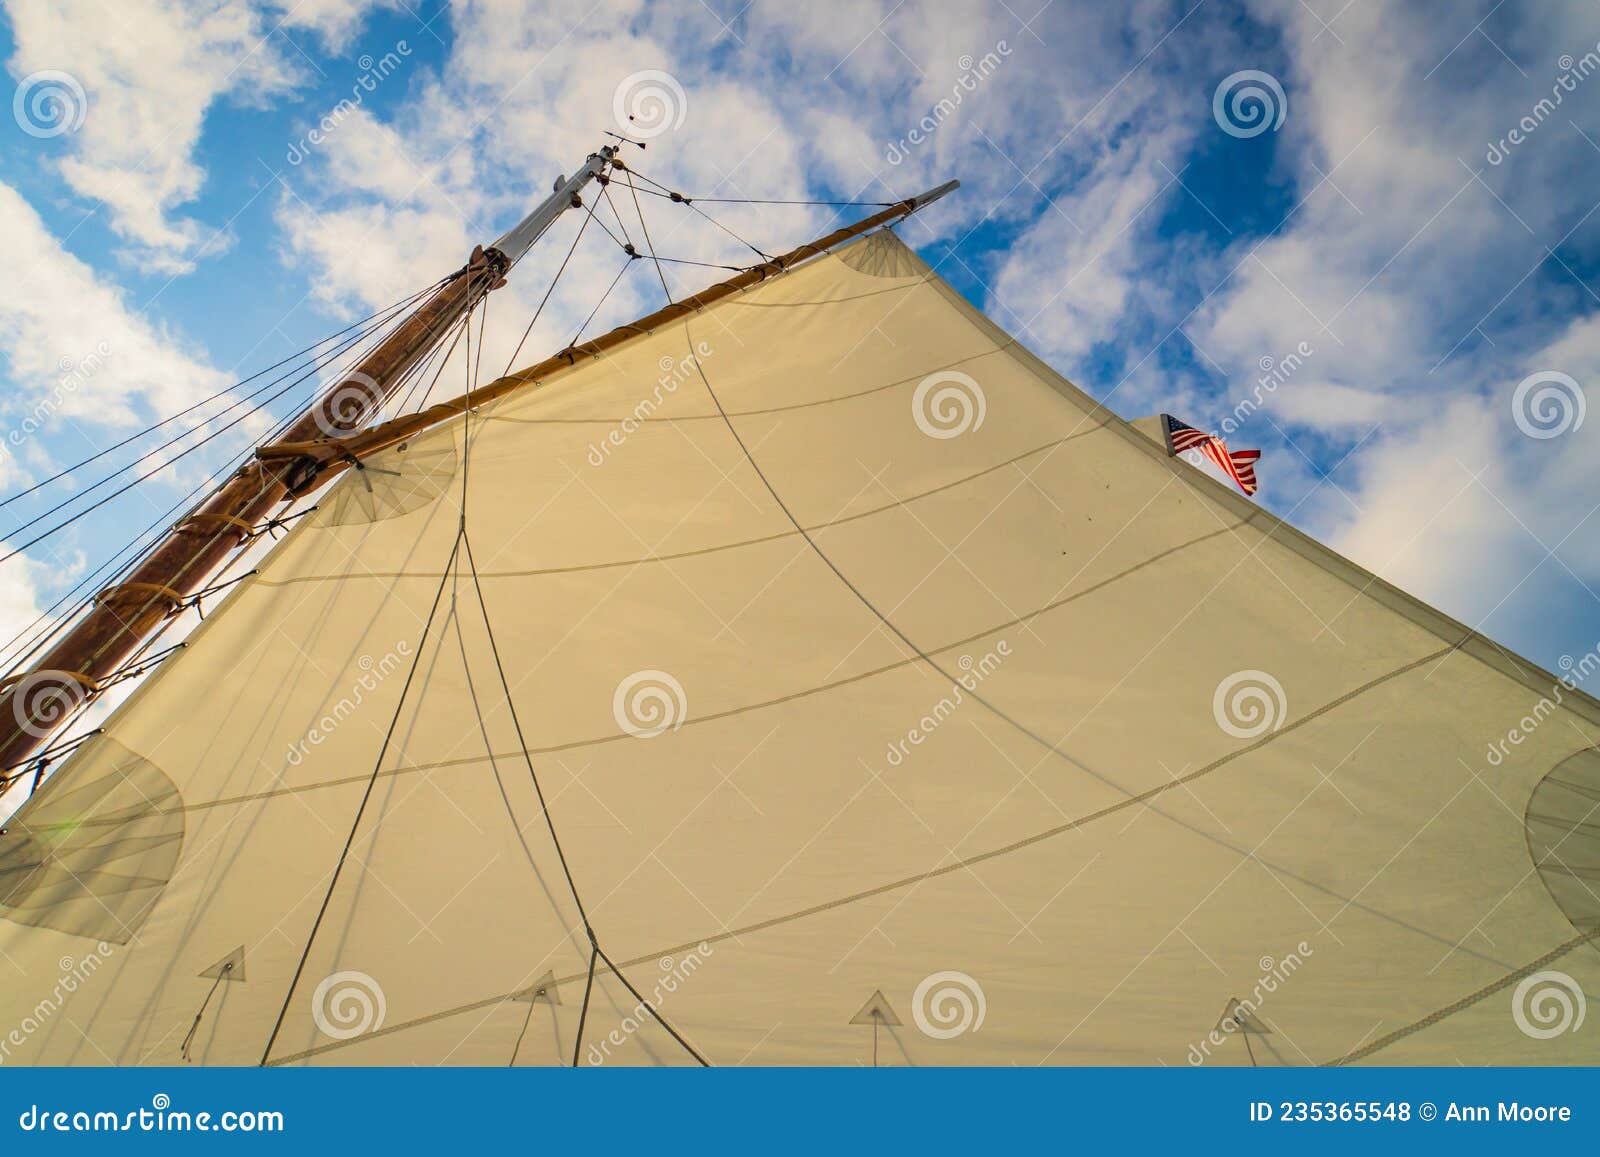 the sail on a historic  gaff-rigged `friendship` sloop